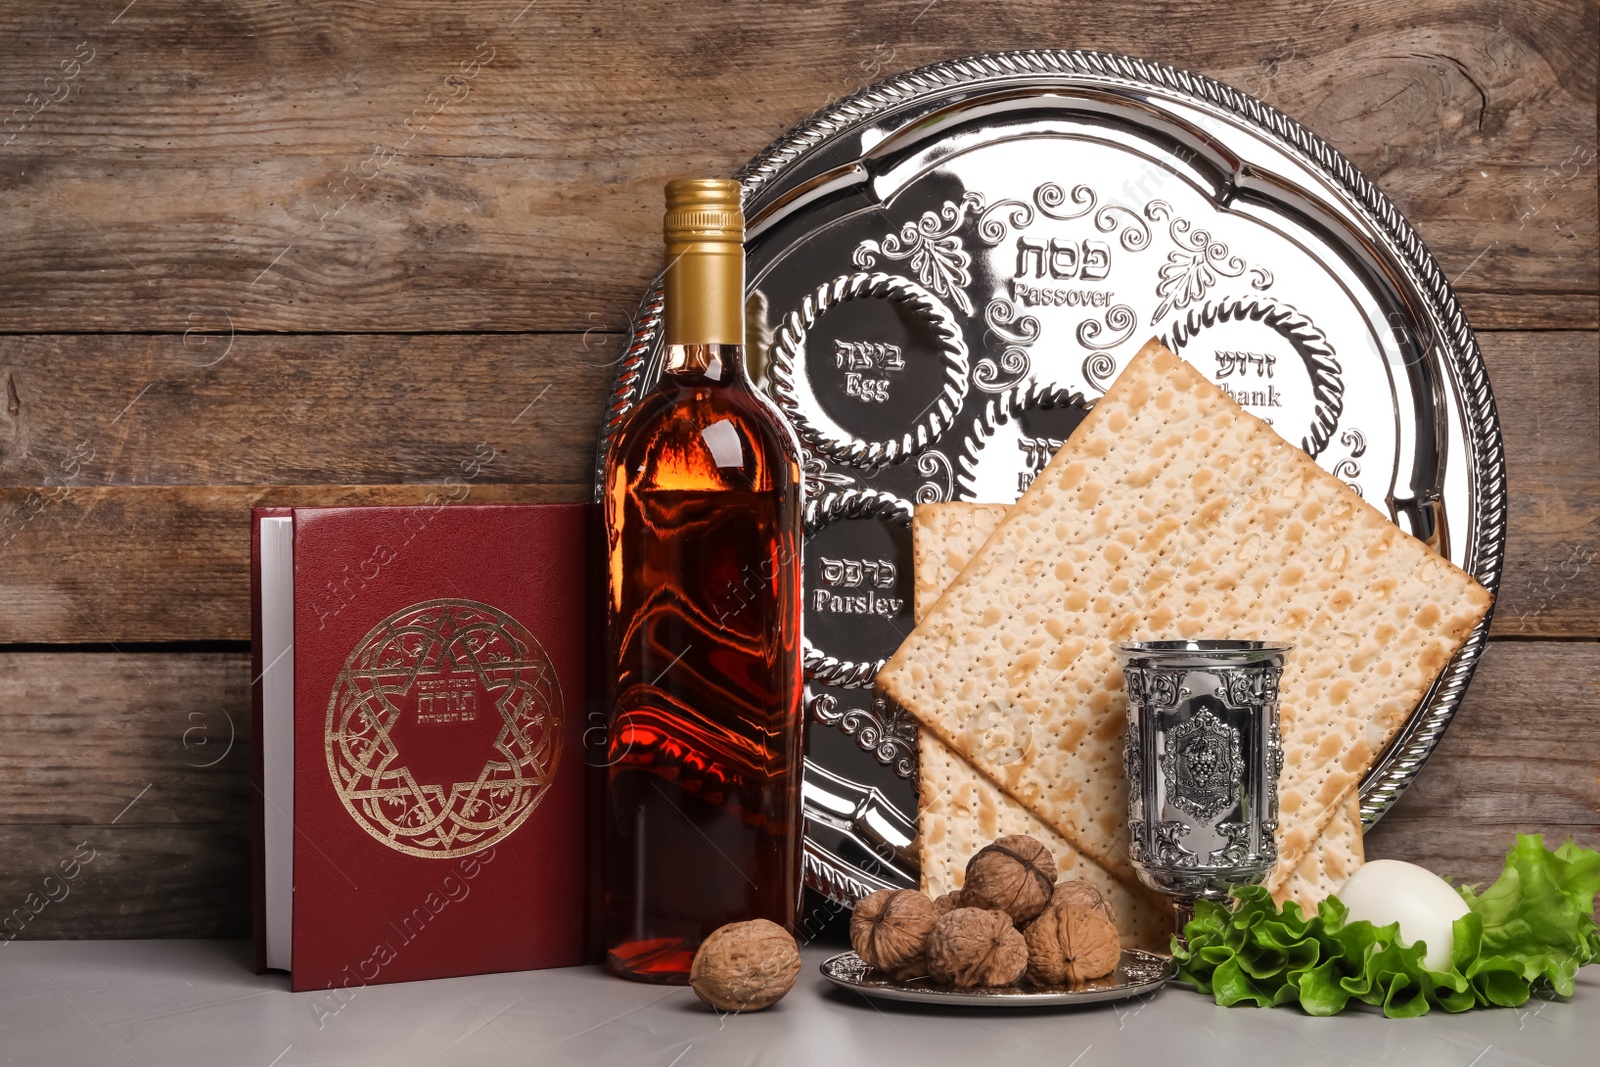 Photo of Symbolic Passover (Pesach) items on table against wooden background